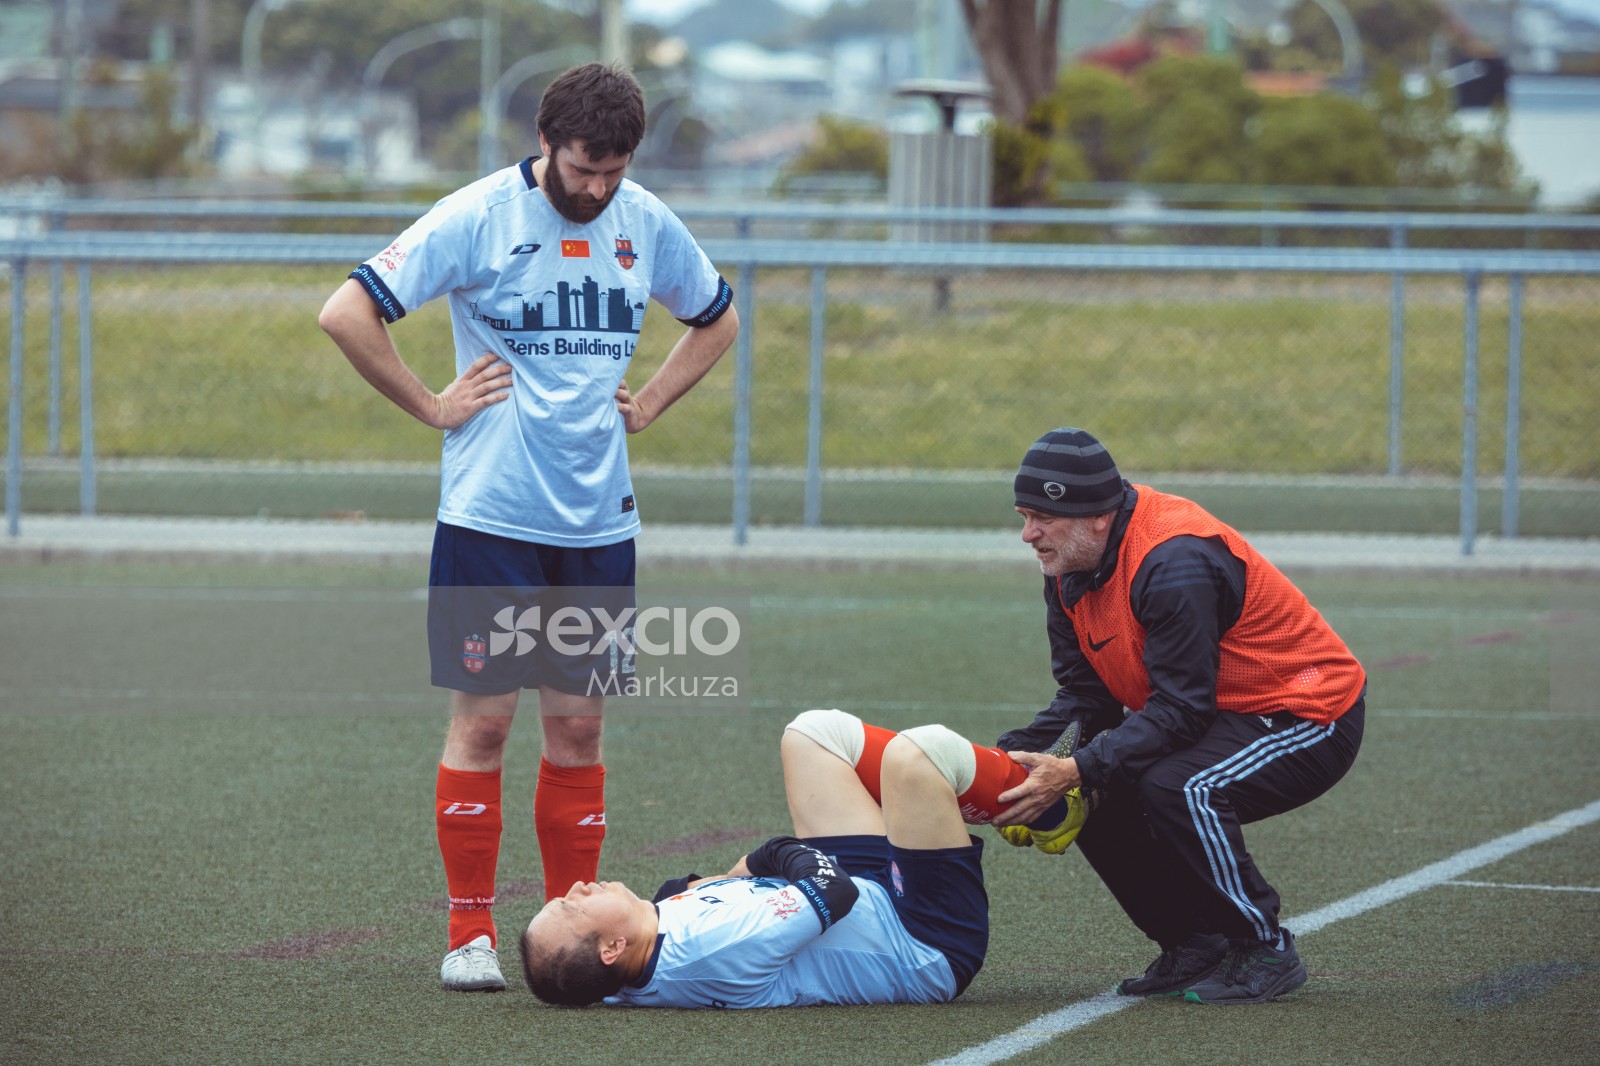 Referee tending to an injured player on the ground - Sports Zone sunday league